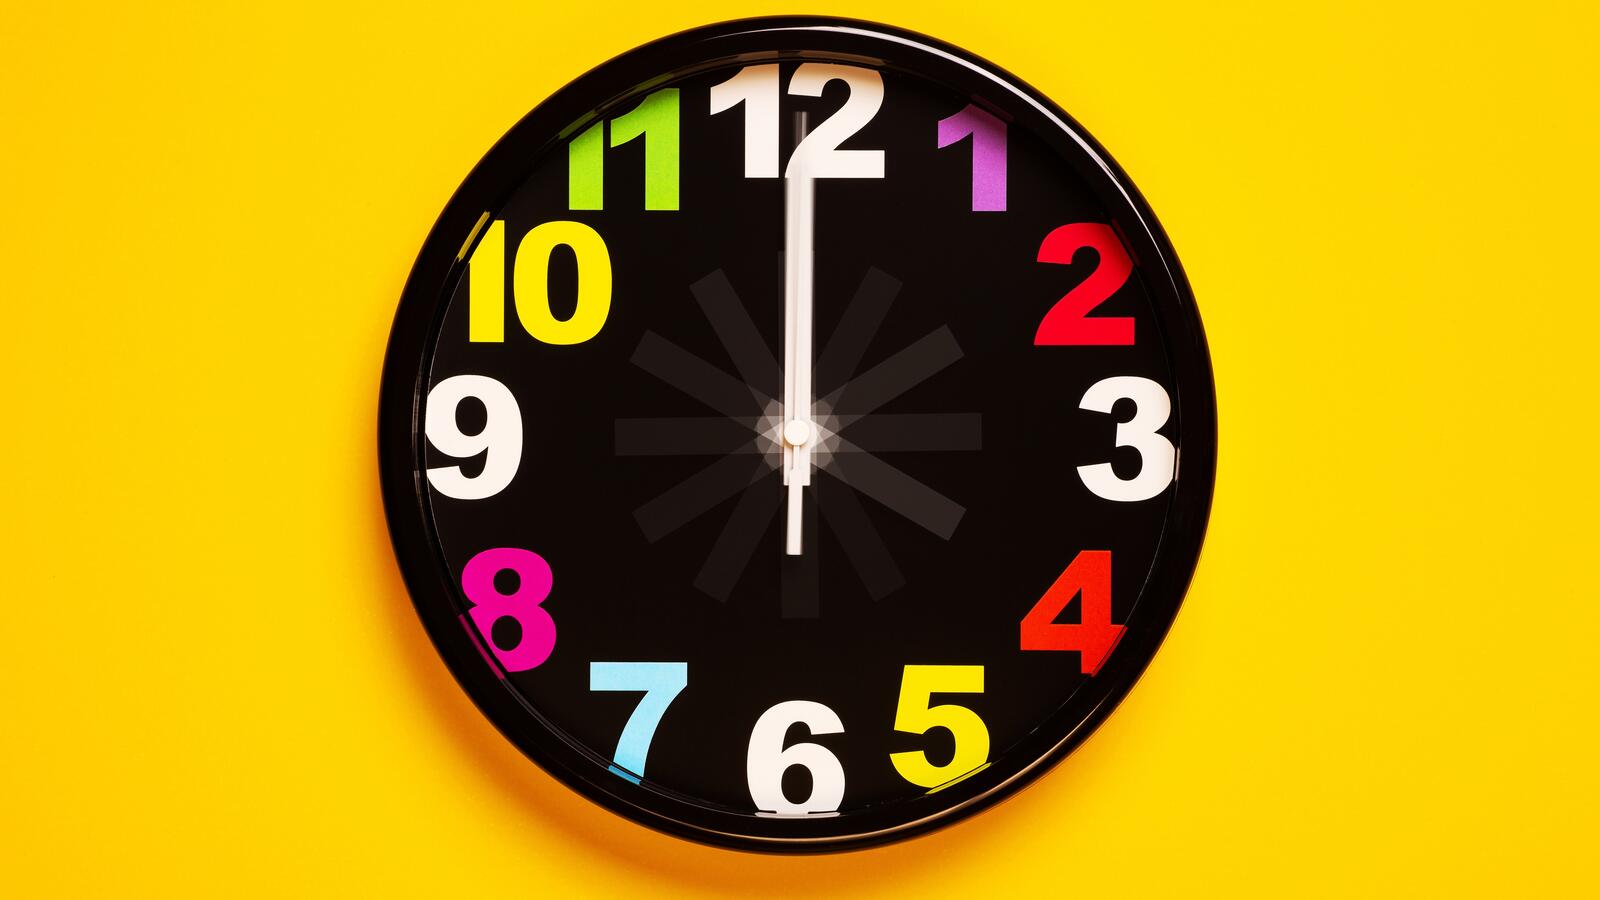 Wallpapers wallpaper colorful clock yellow wall yellow background on the desktop